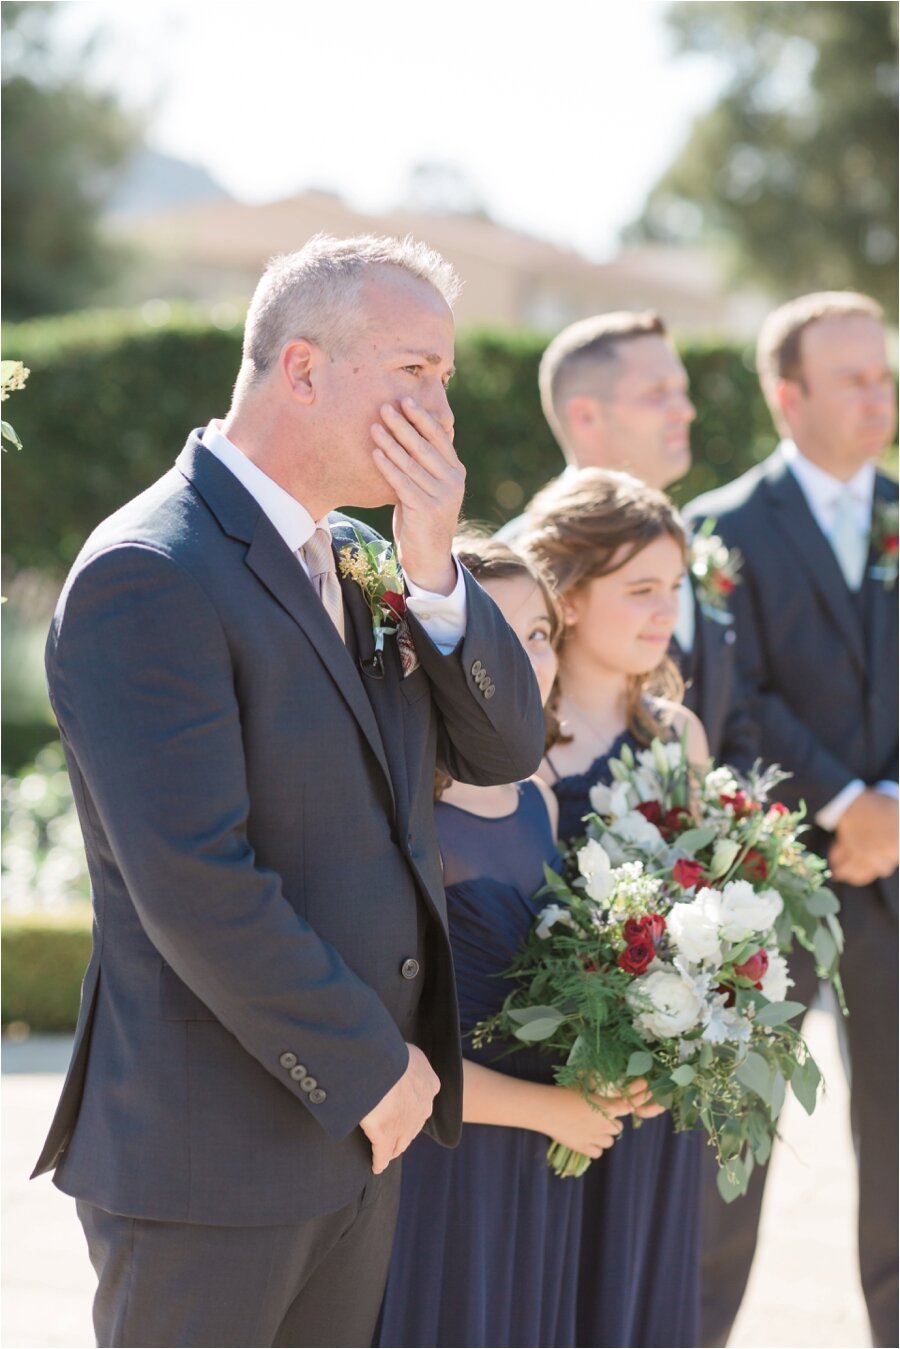 Grooms reaction when he sees his bride walking down the aisle